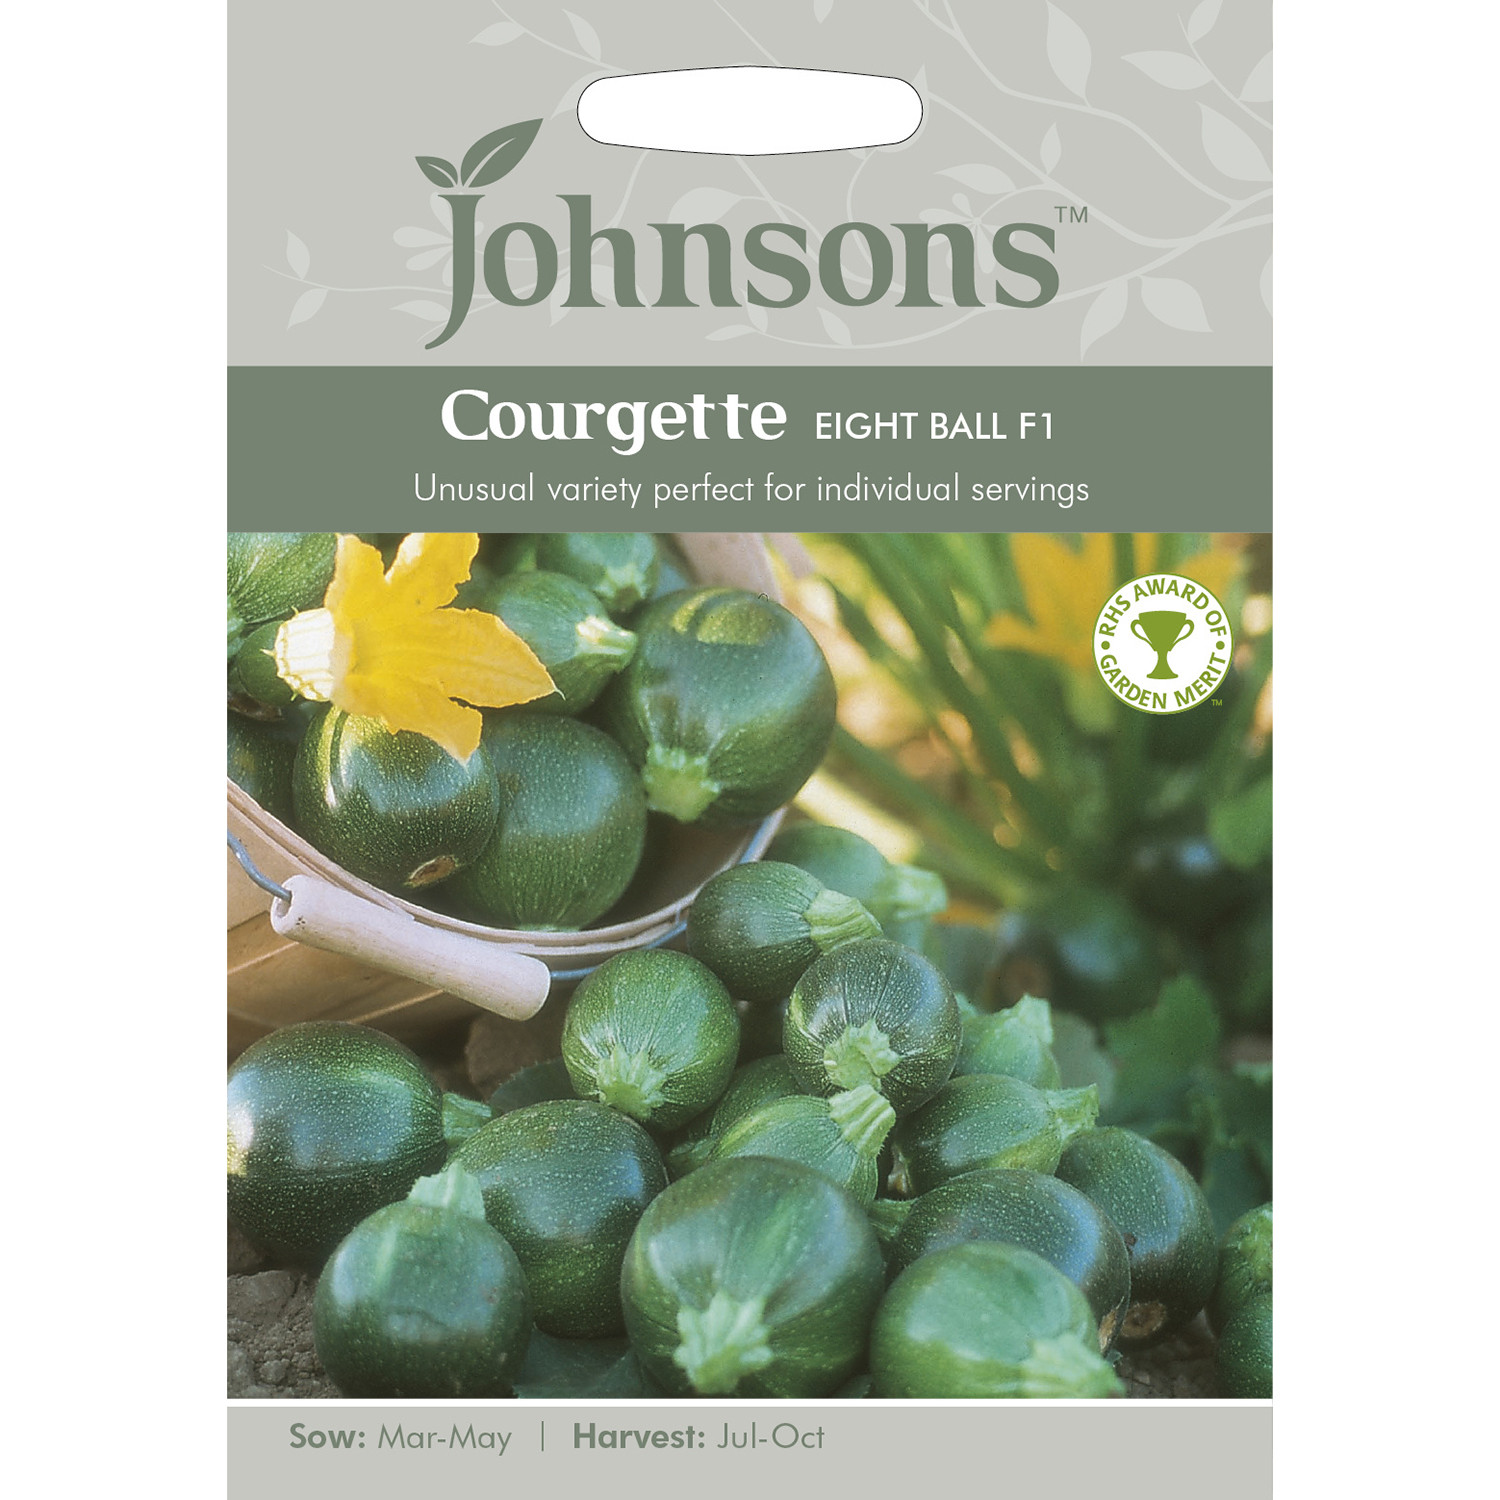 Johnsons 8 Ball F1 Courgette Seeds Image 2